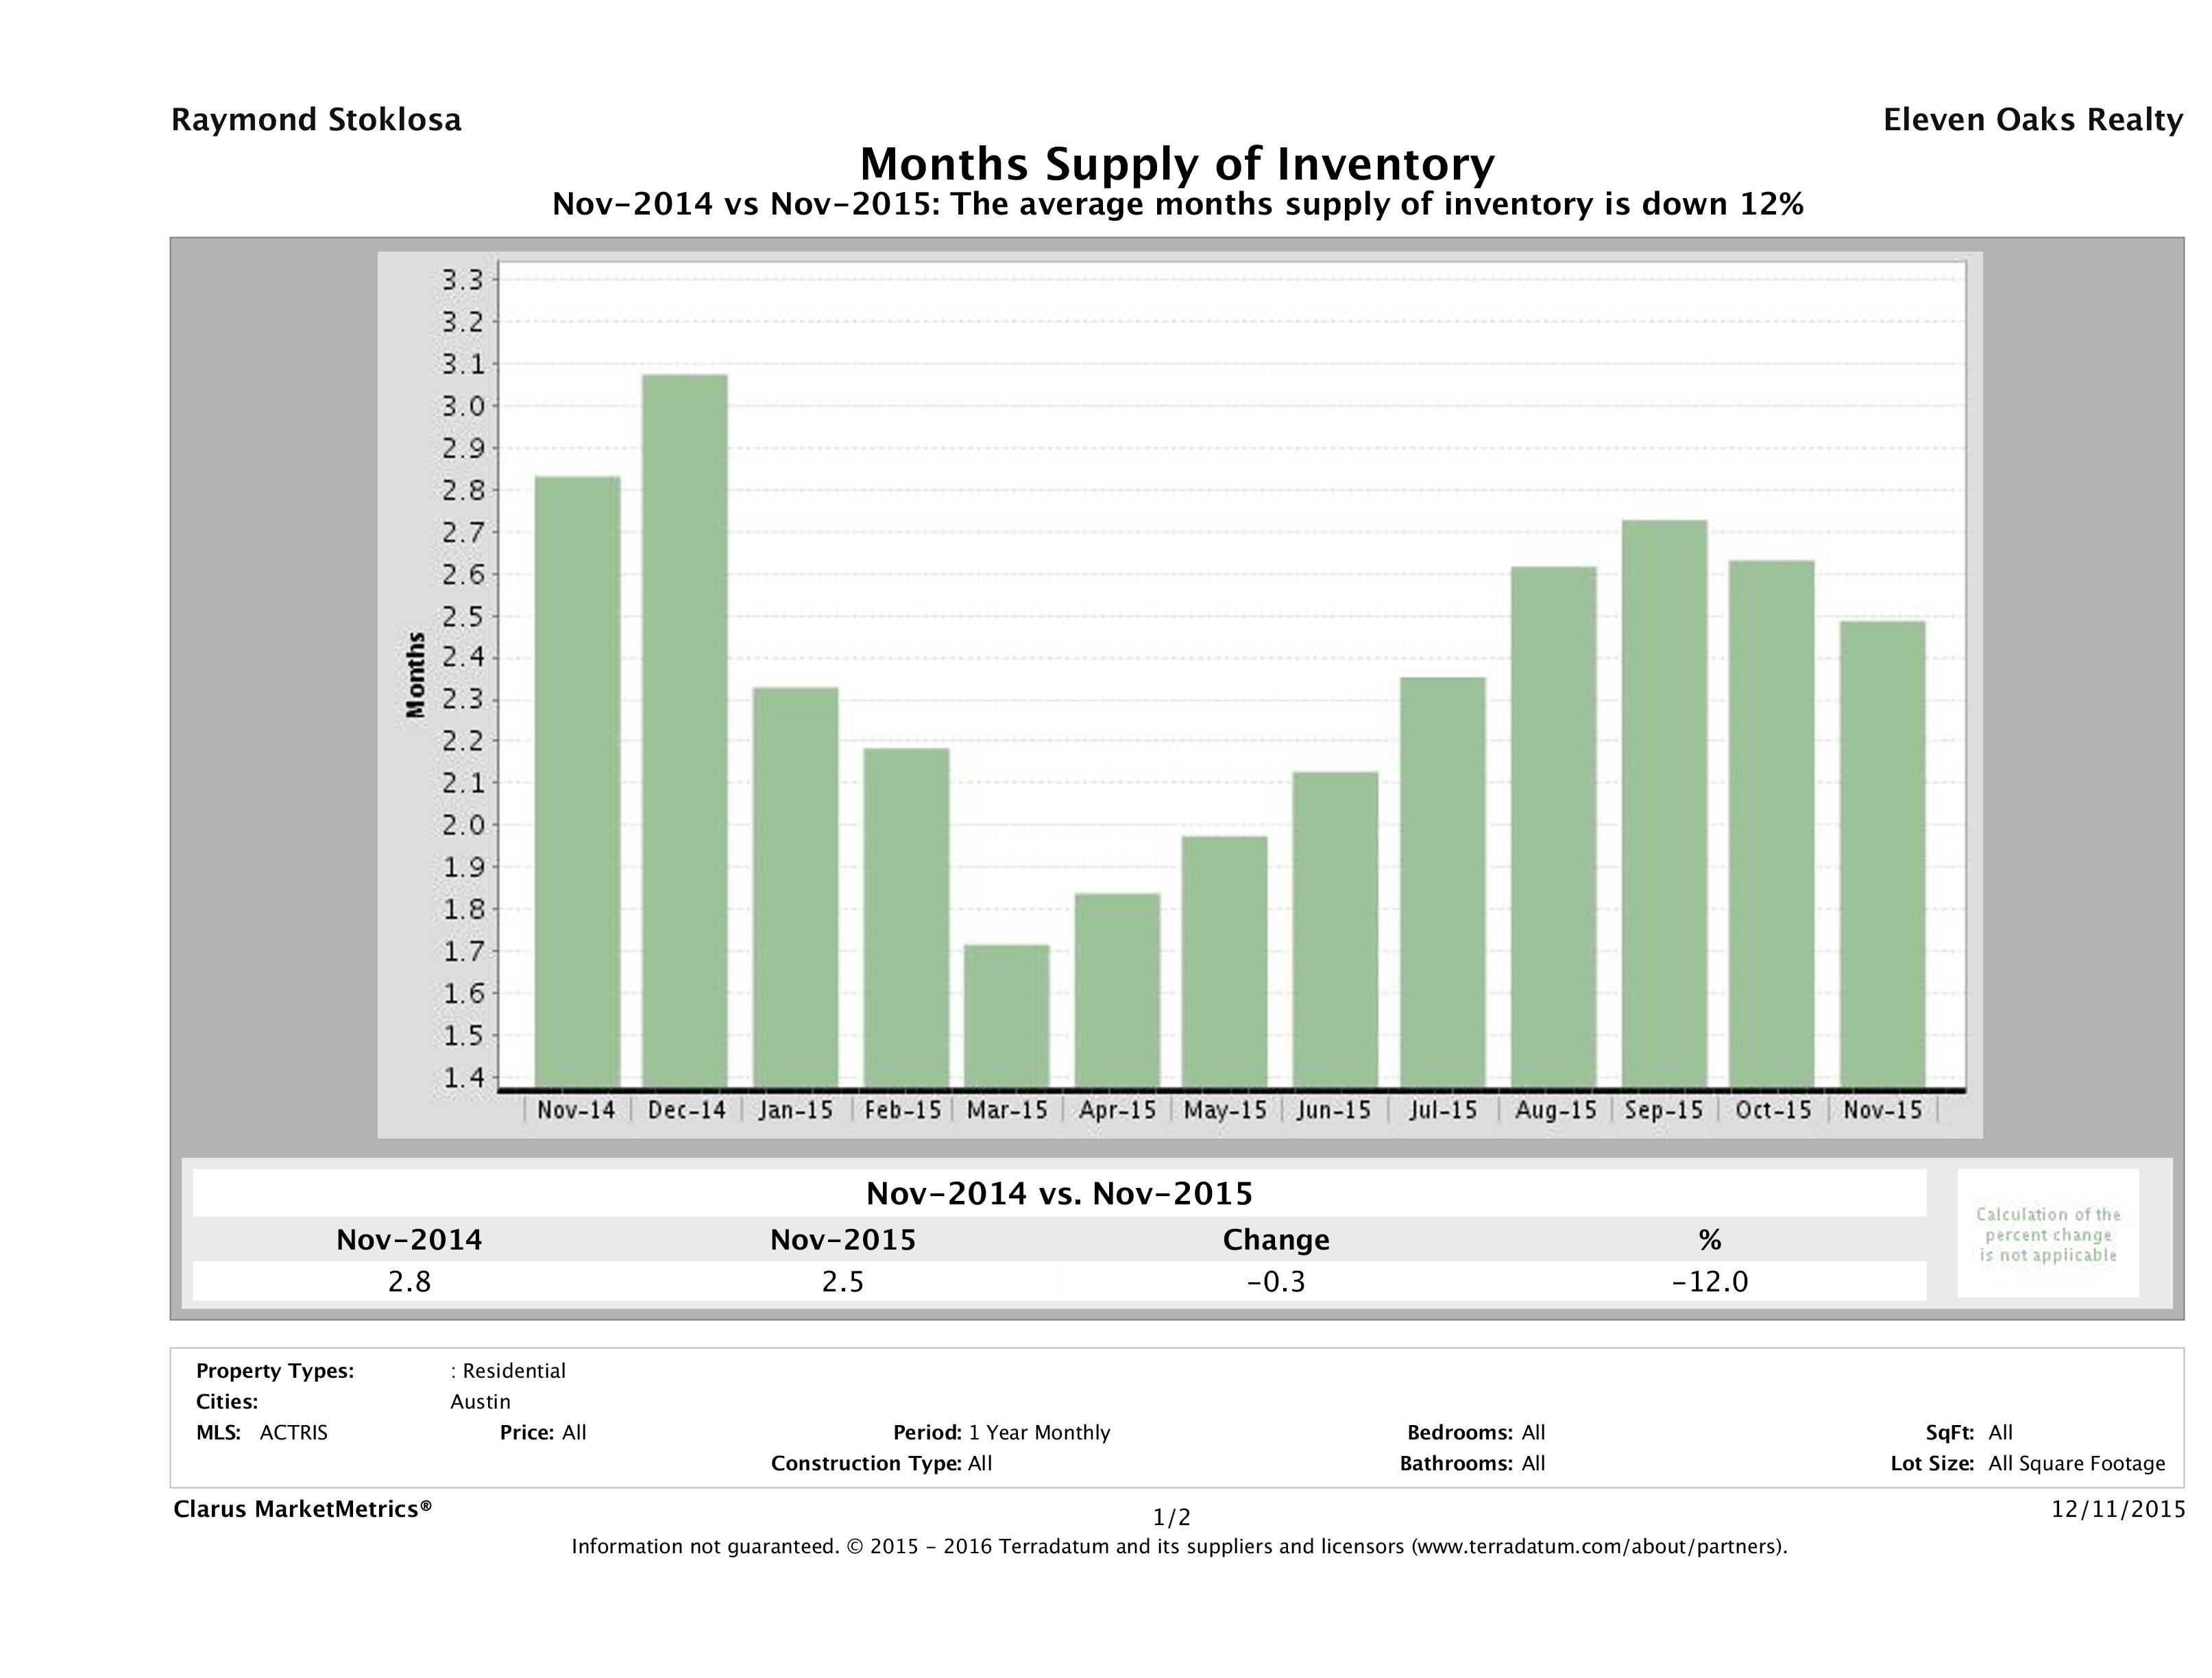 Austin single family home months inventory November 2015